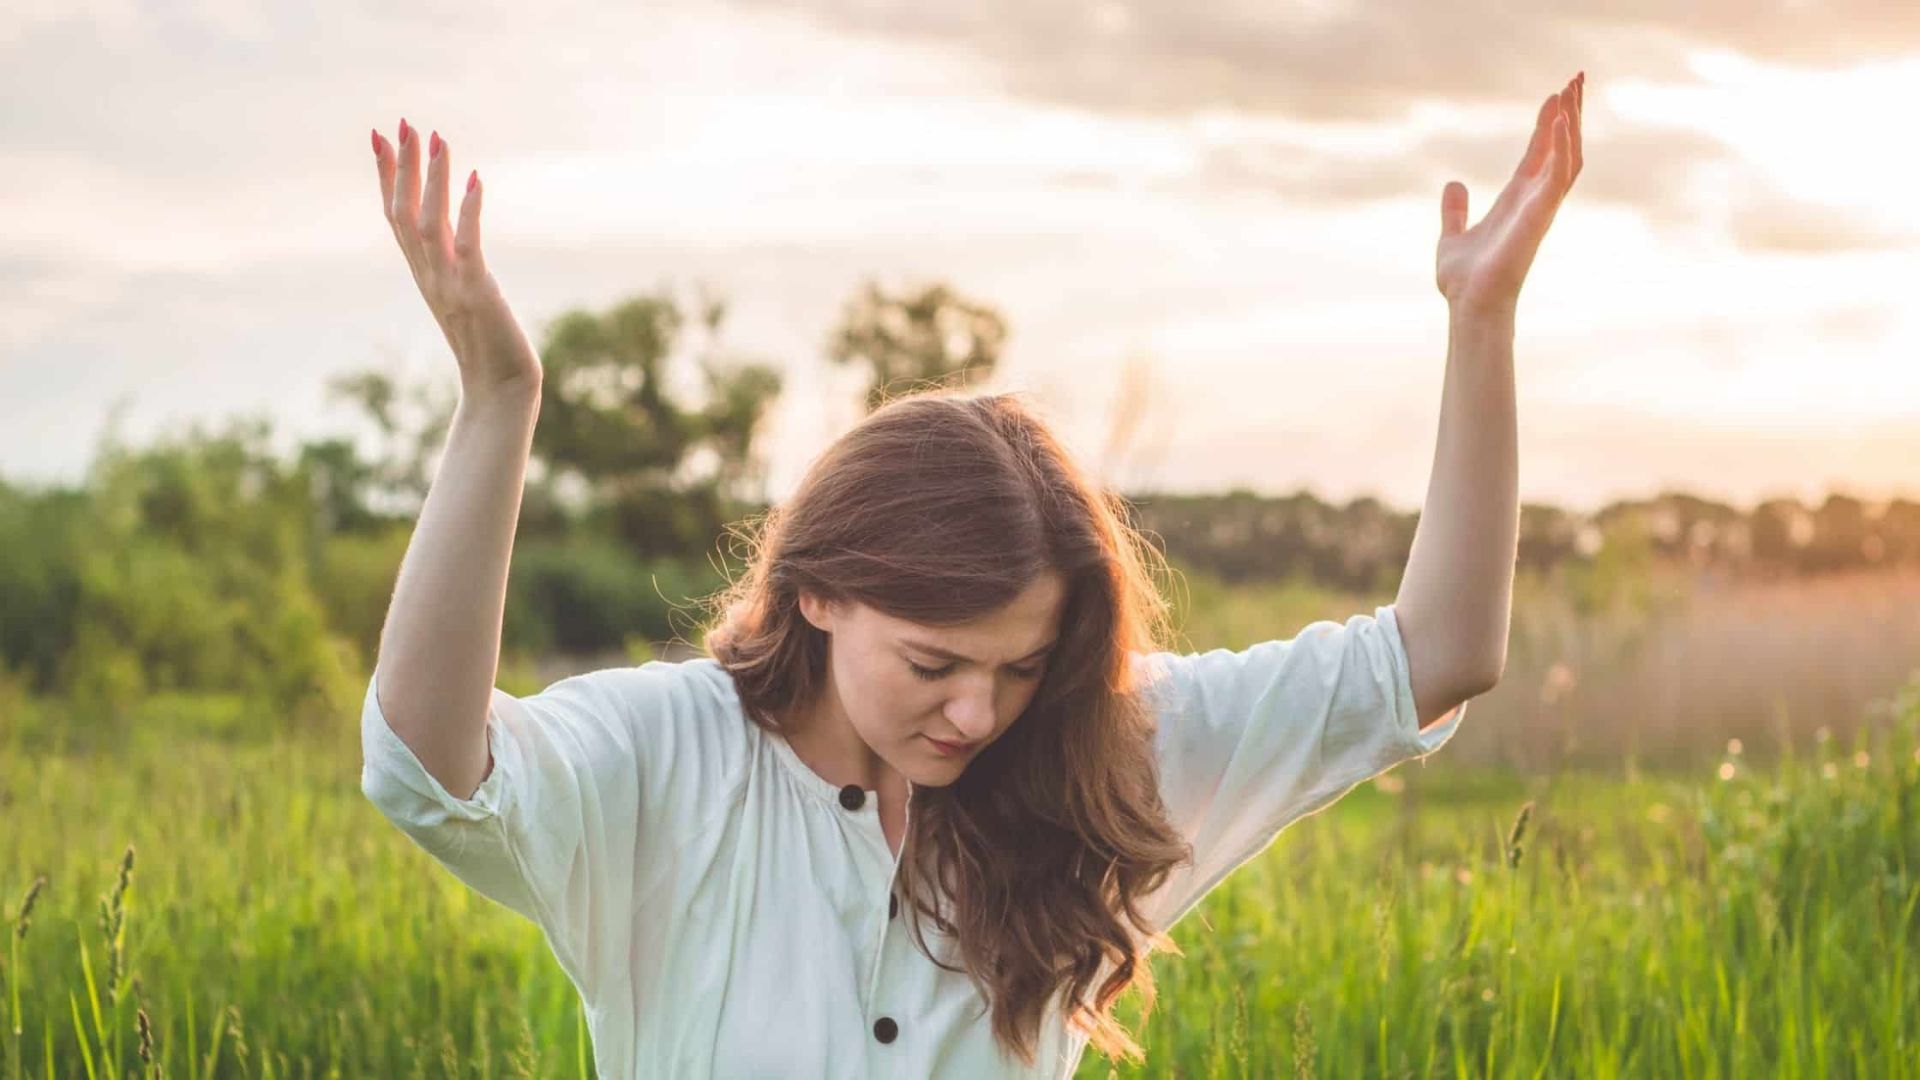 Woman Standing In A Field With Hands Lifted To The Sky In Prayer